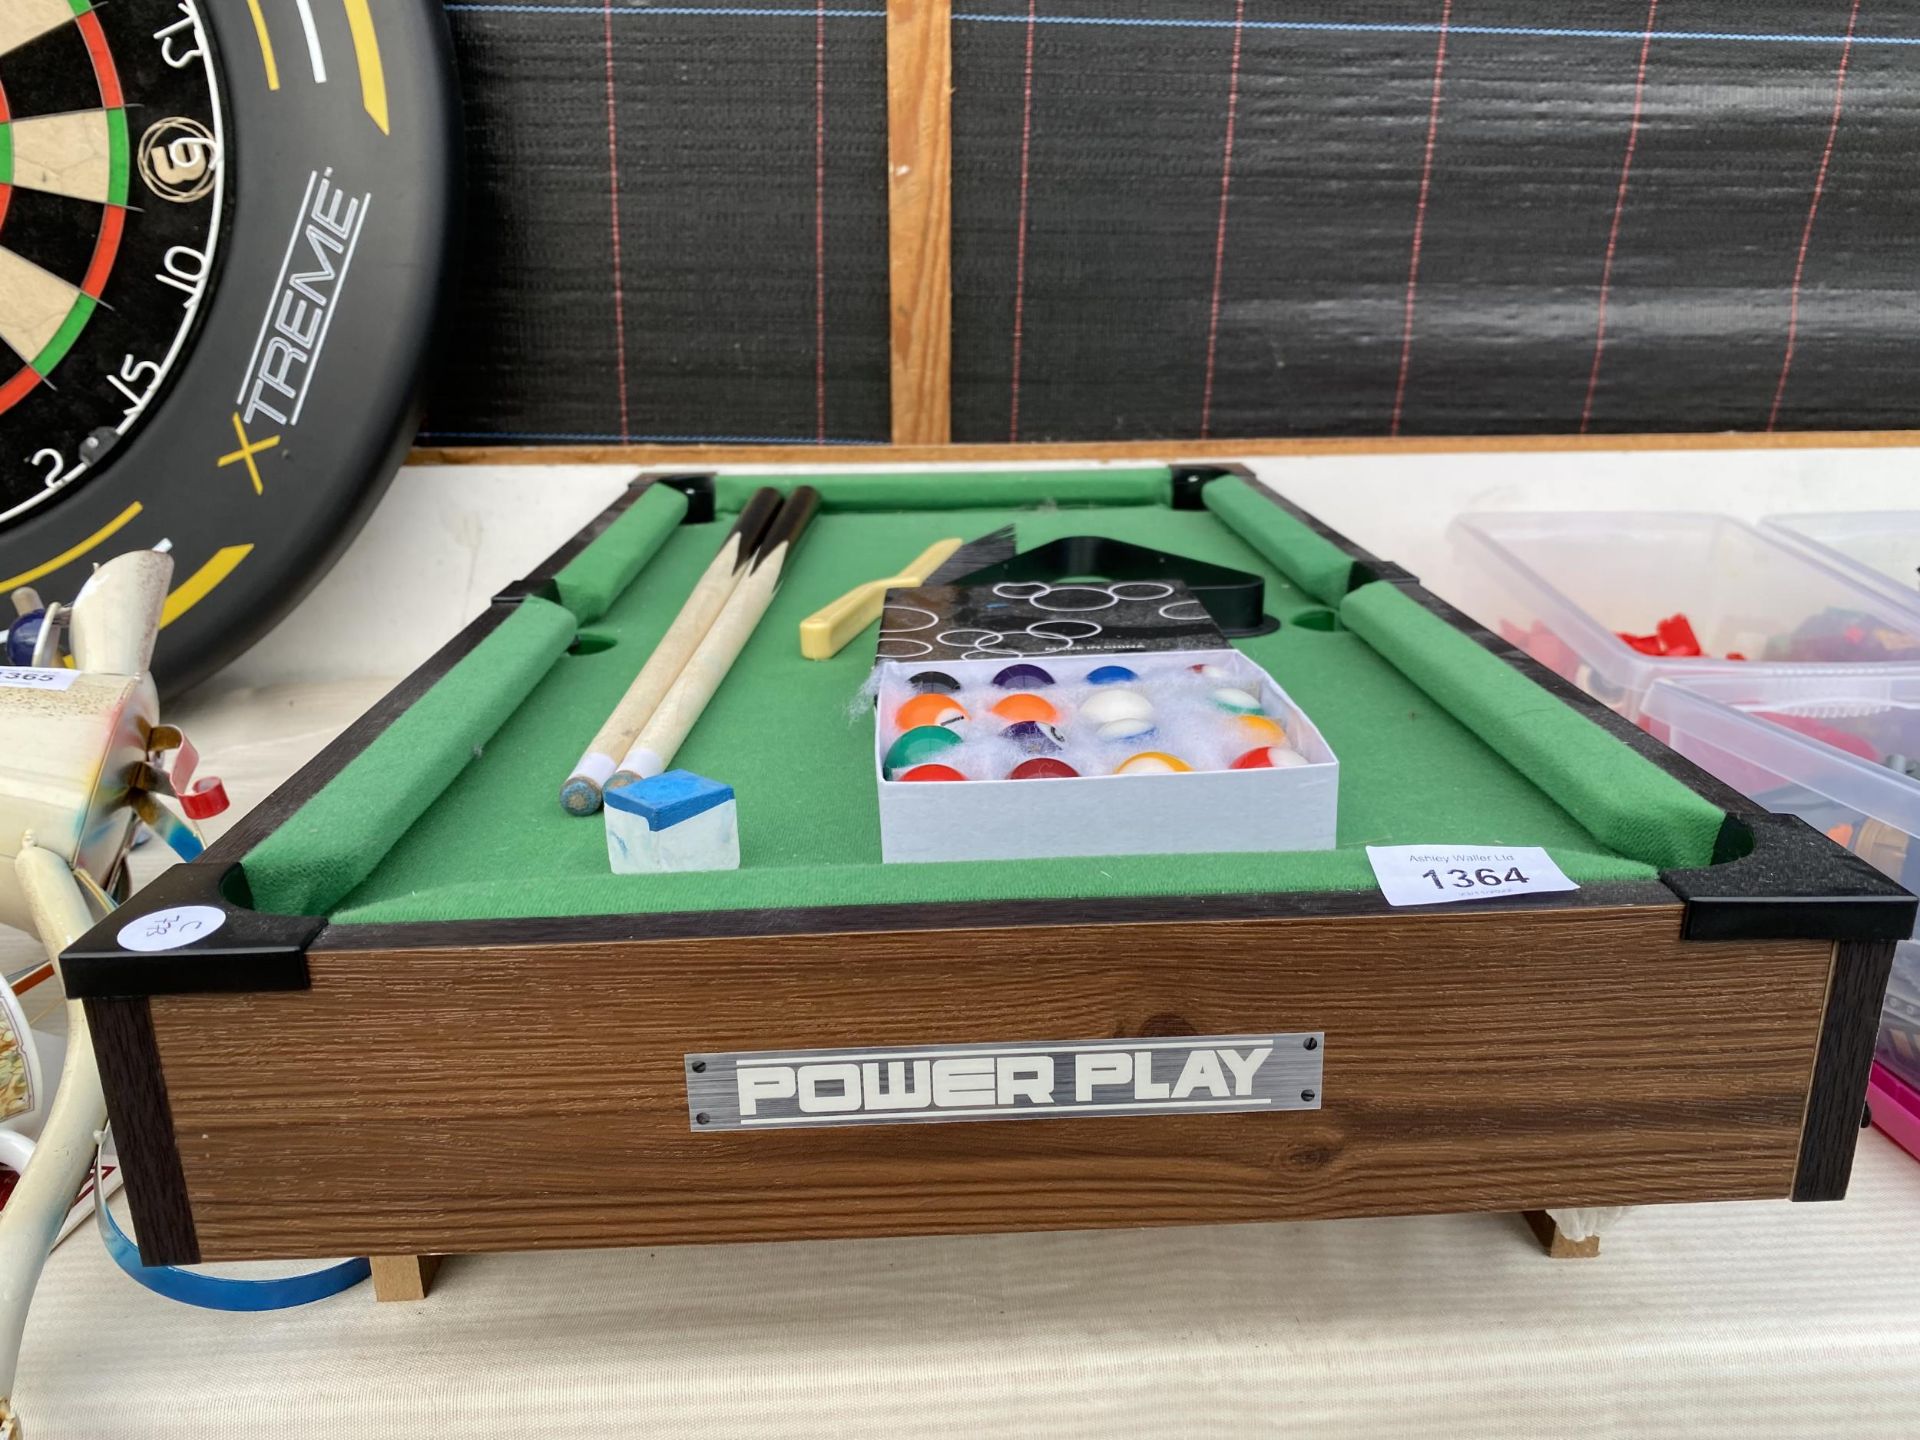 A POWER PLAY MINITURE TABLE TOP POOL TABLE WITH TWO CUES, BALLS AND TRIANGLE ETC - Image 2 of 3